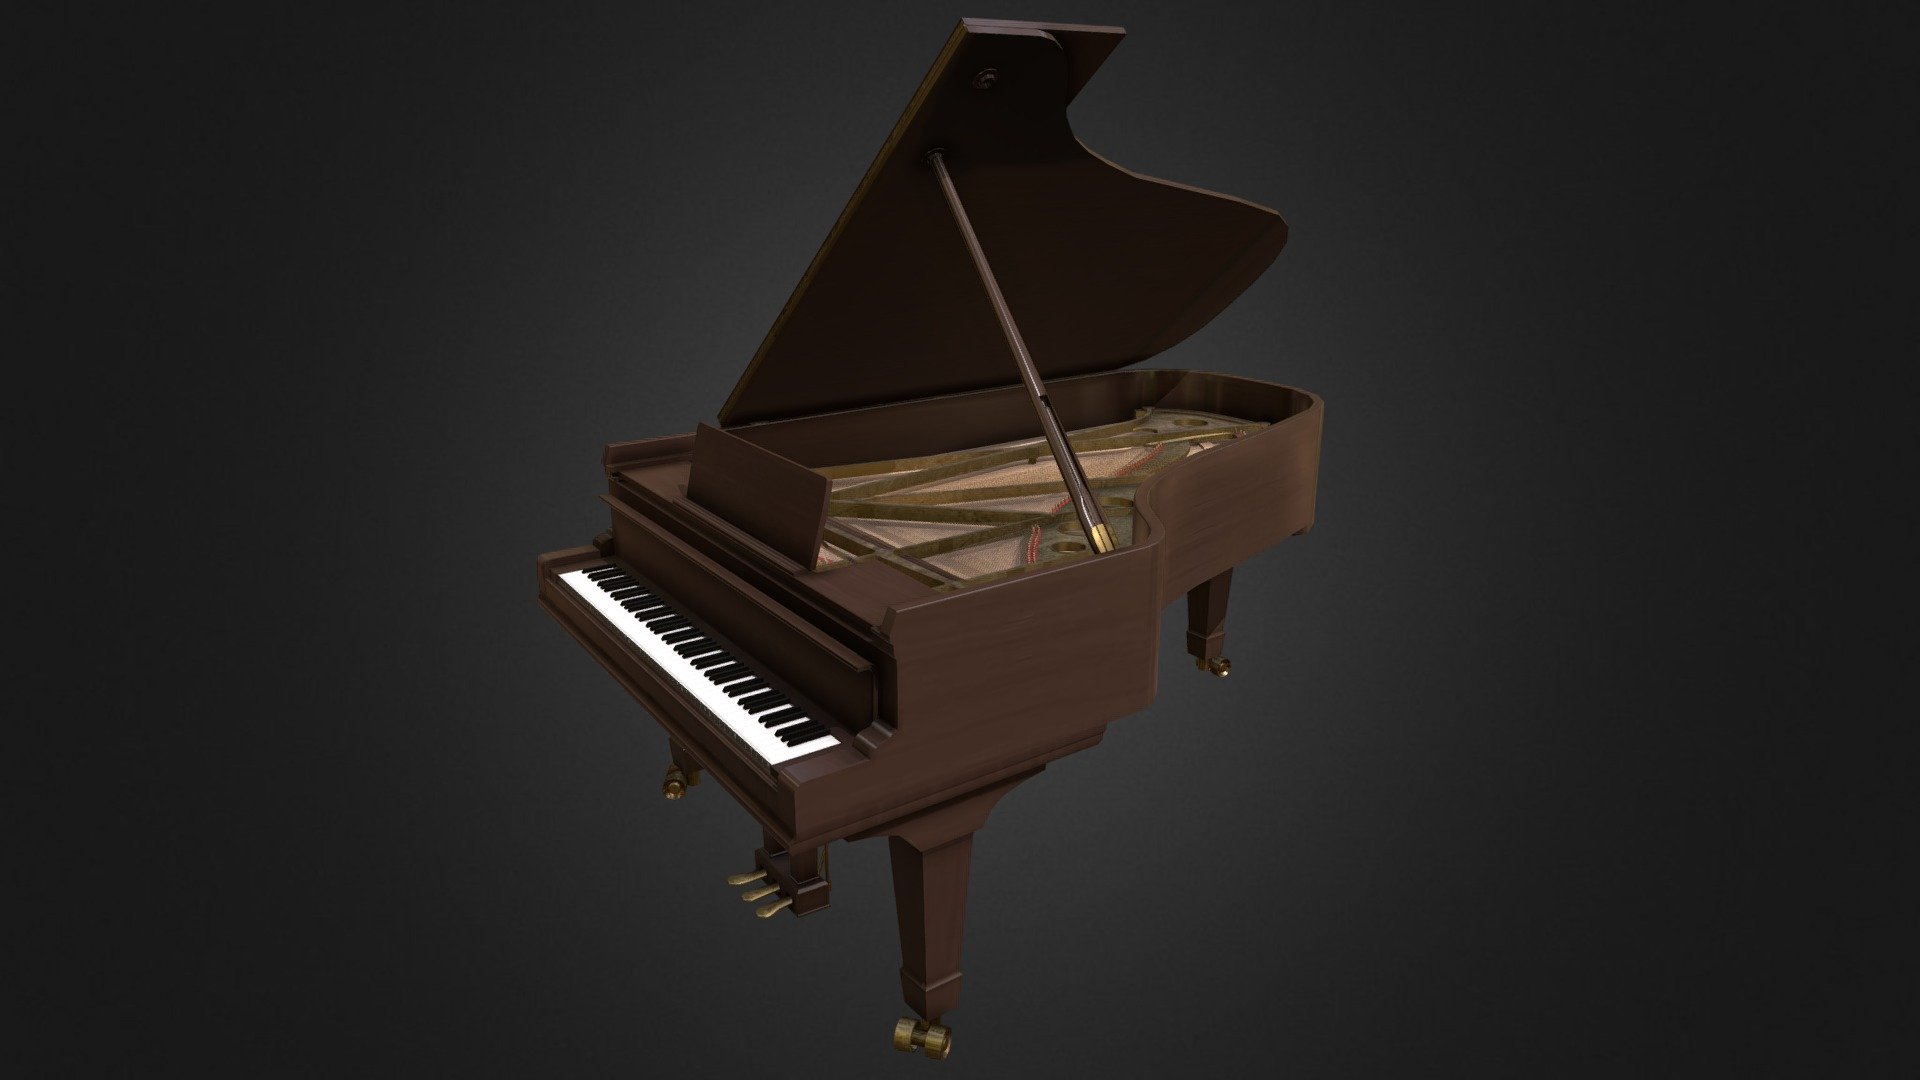 Based off of a Weinbach piano and the 1885 patent blueprints for a Steinway.
https://artstn.co/m/yklG

I tried to kept the look just generic enough that with a little texture altering to make it darker or lighter this piano could work for just about any scene, such as a concert setting, a living room setting, a &ldquo;Tom cuts the rope and tries to smash Jerry